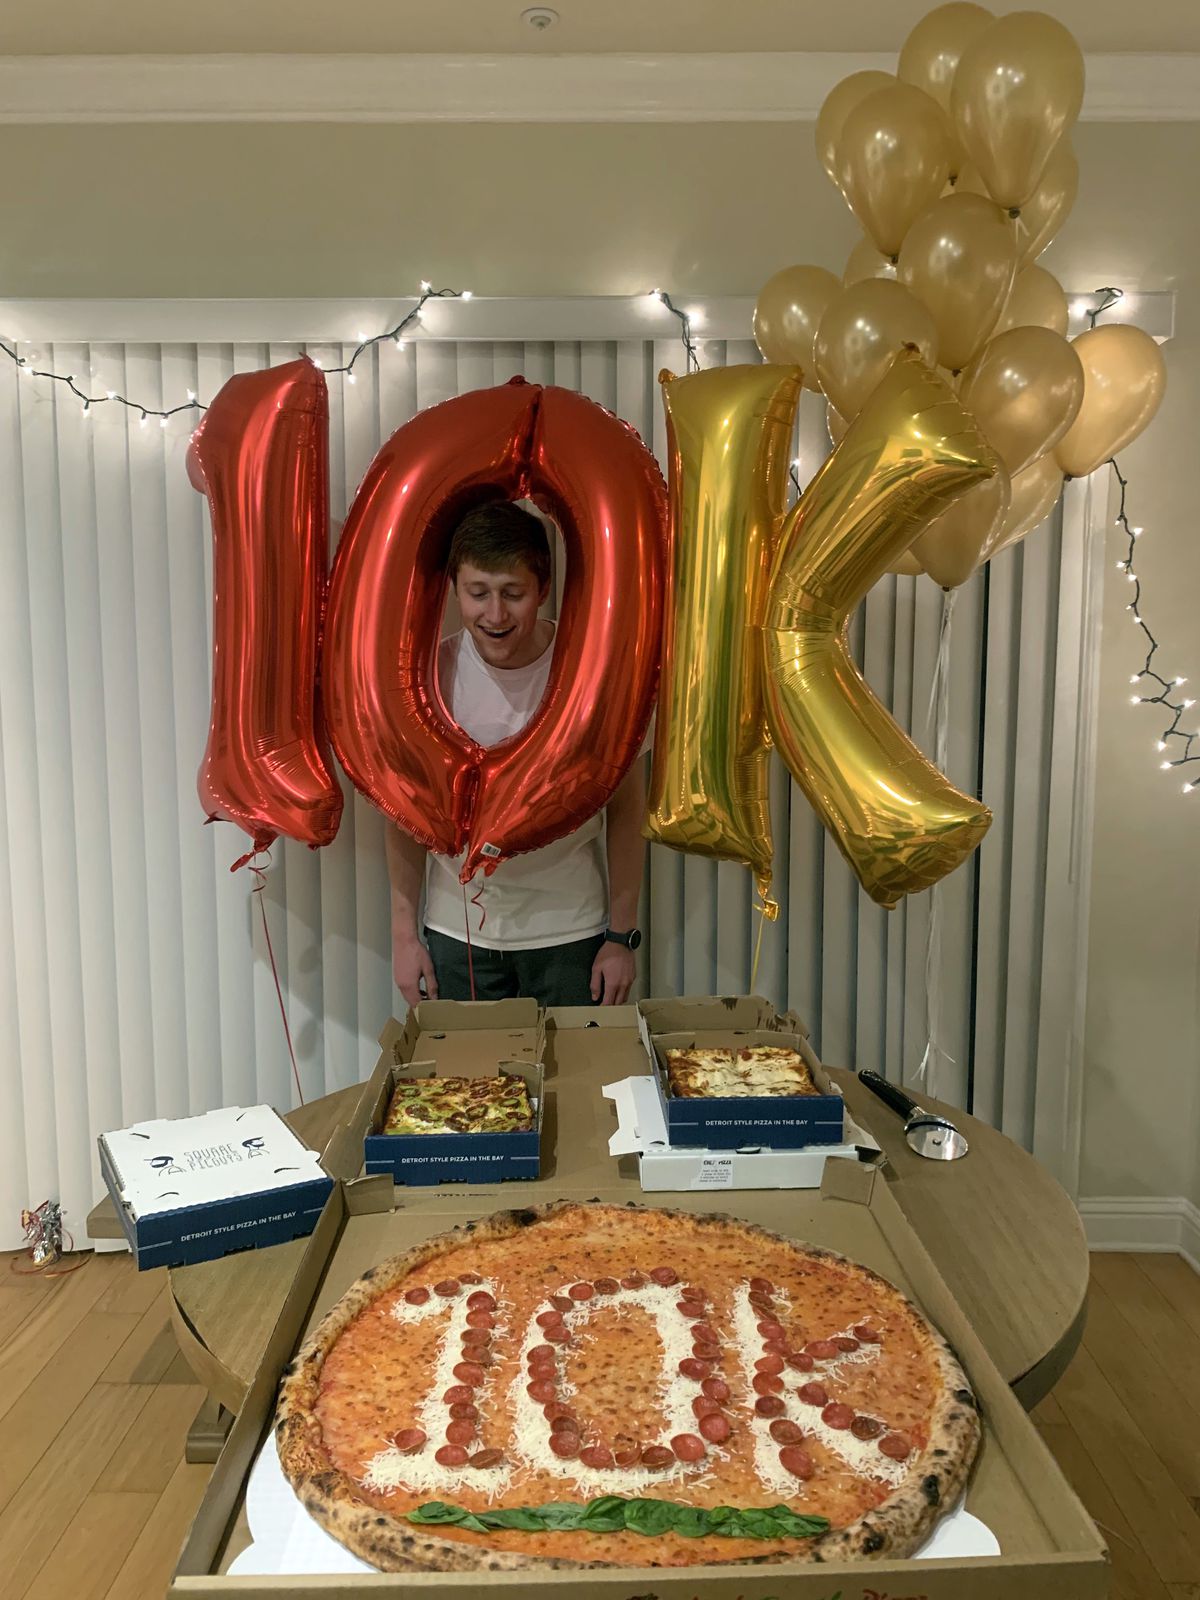 George Matelich stands with balloons that spell out “10K” alongside a pizza with “10K” spelled out in pepperoni, in honor of reaching 10,000 followers.